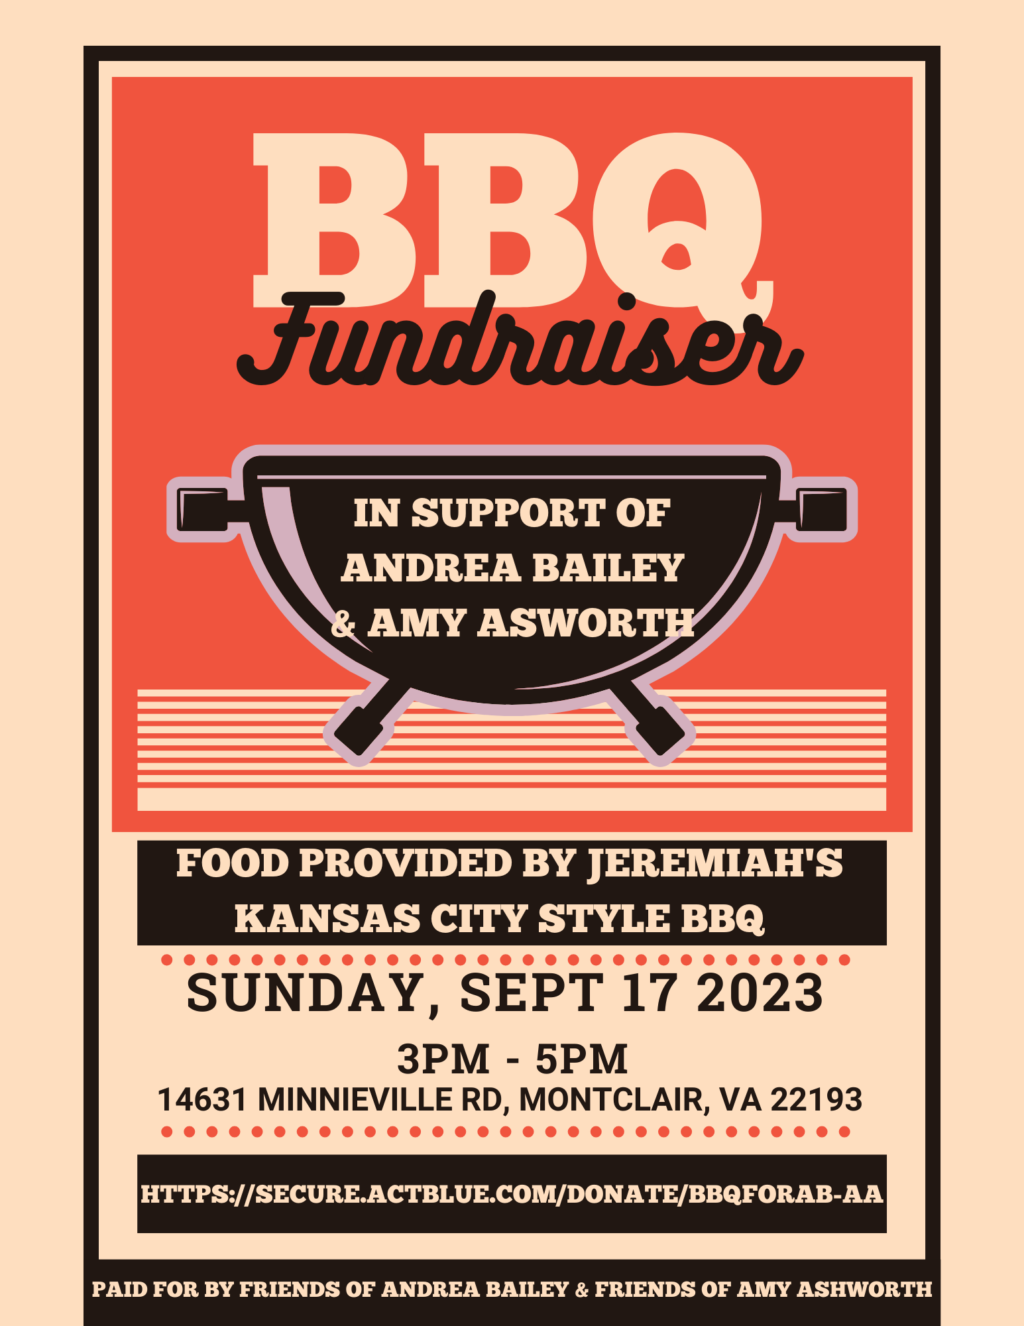 BBQ Fundraiser with Andrea Bailey and Amy Ashworth